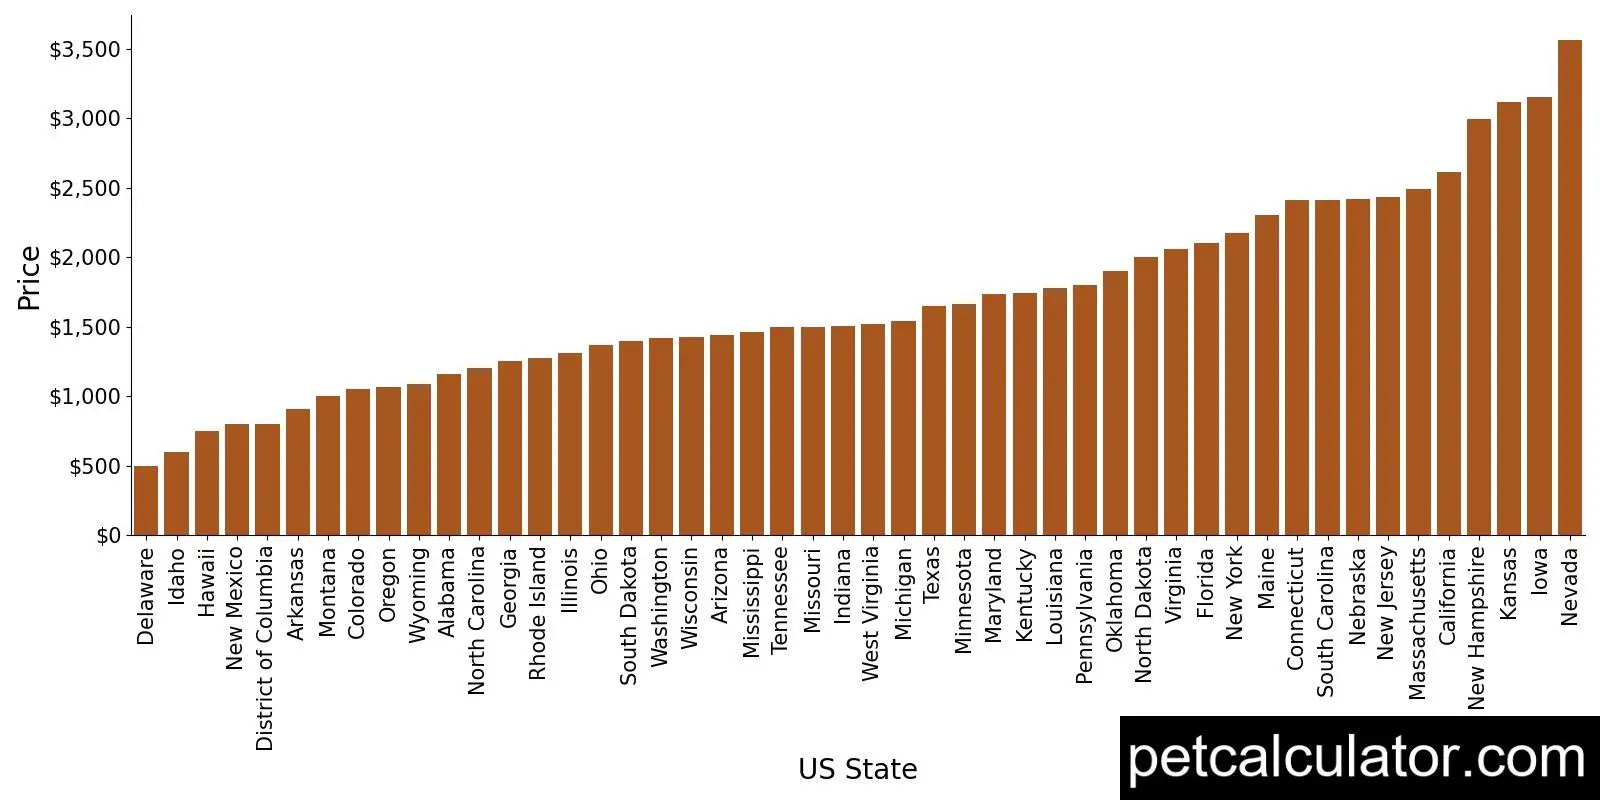 Price of Chihuahua by US State 